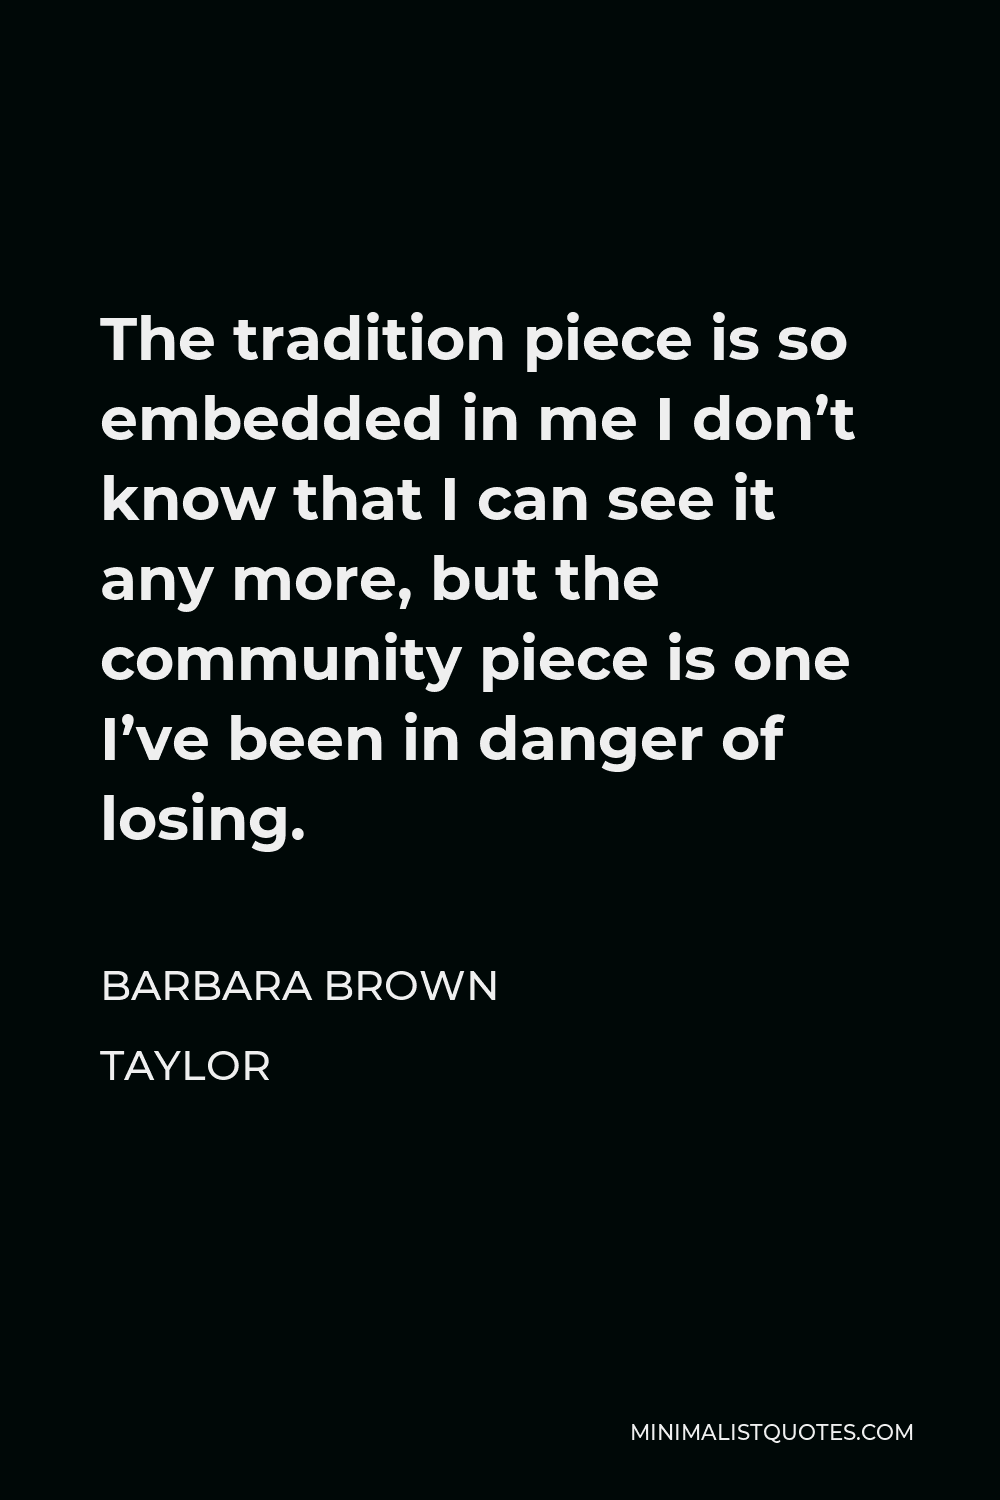 Barbara Brown Taylor Quote - The tradition piece is so embedded in me I don’t know that I can see it any more, but the community piece is one I’ve been in danger of losing.